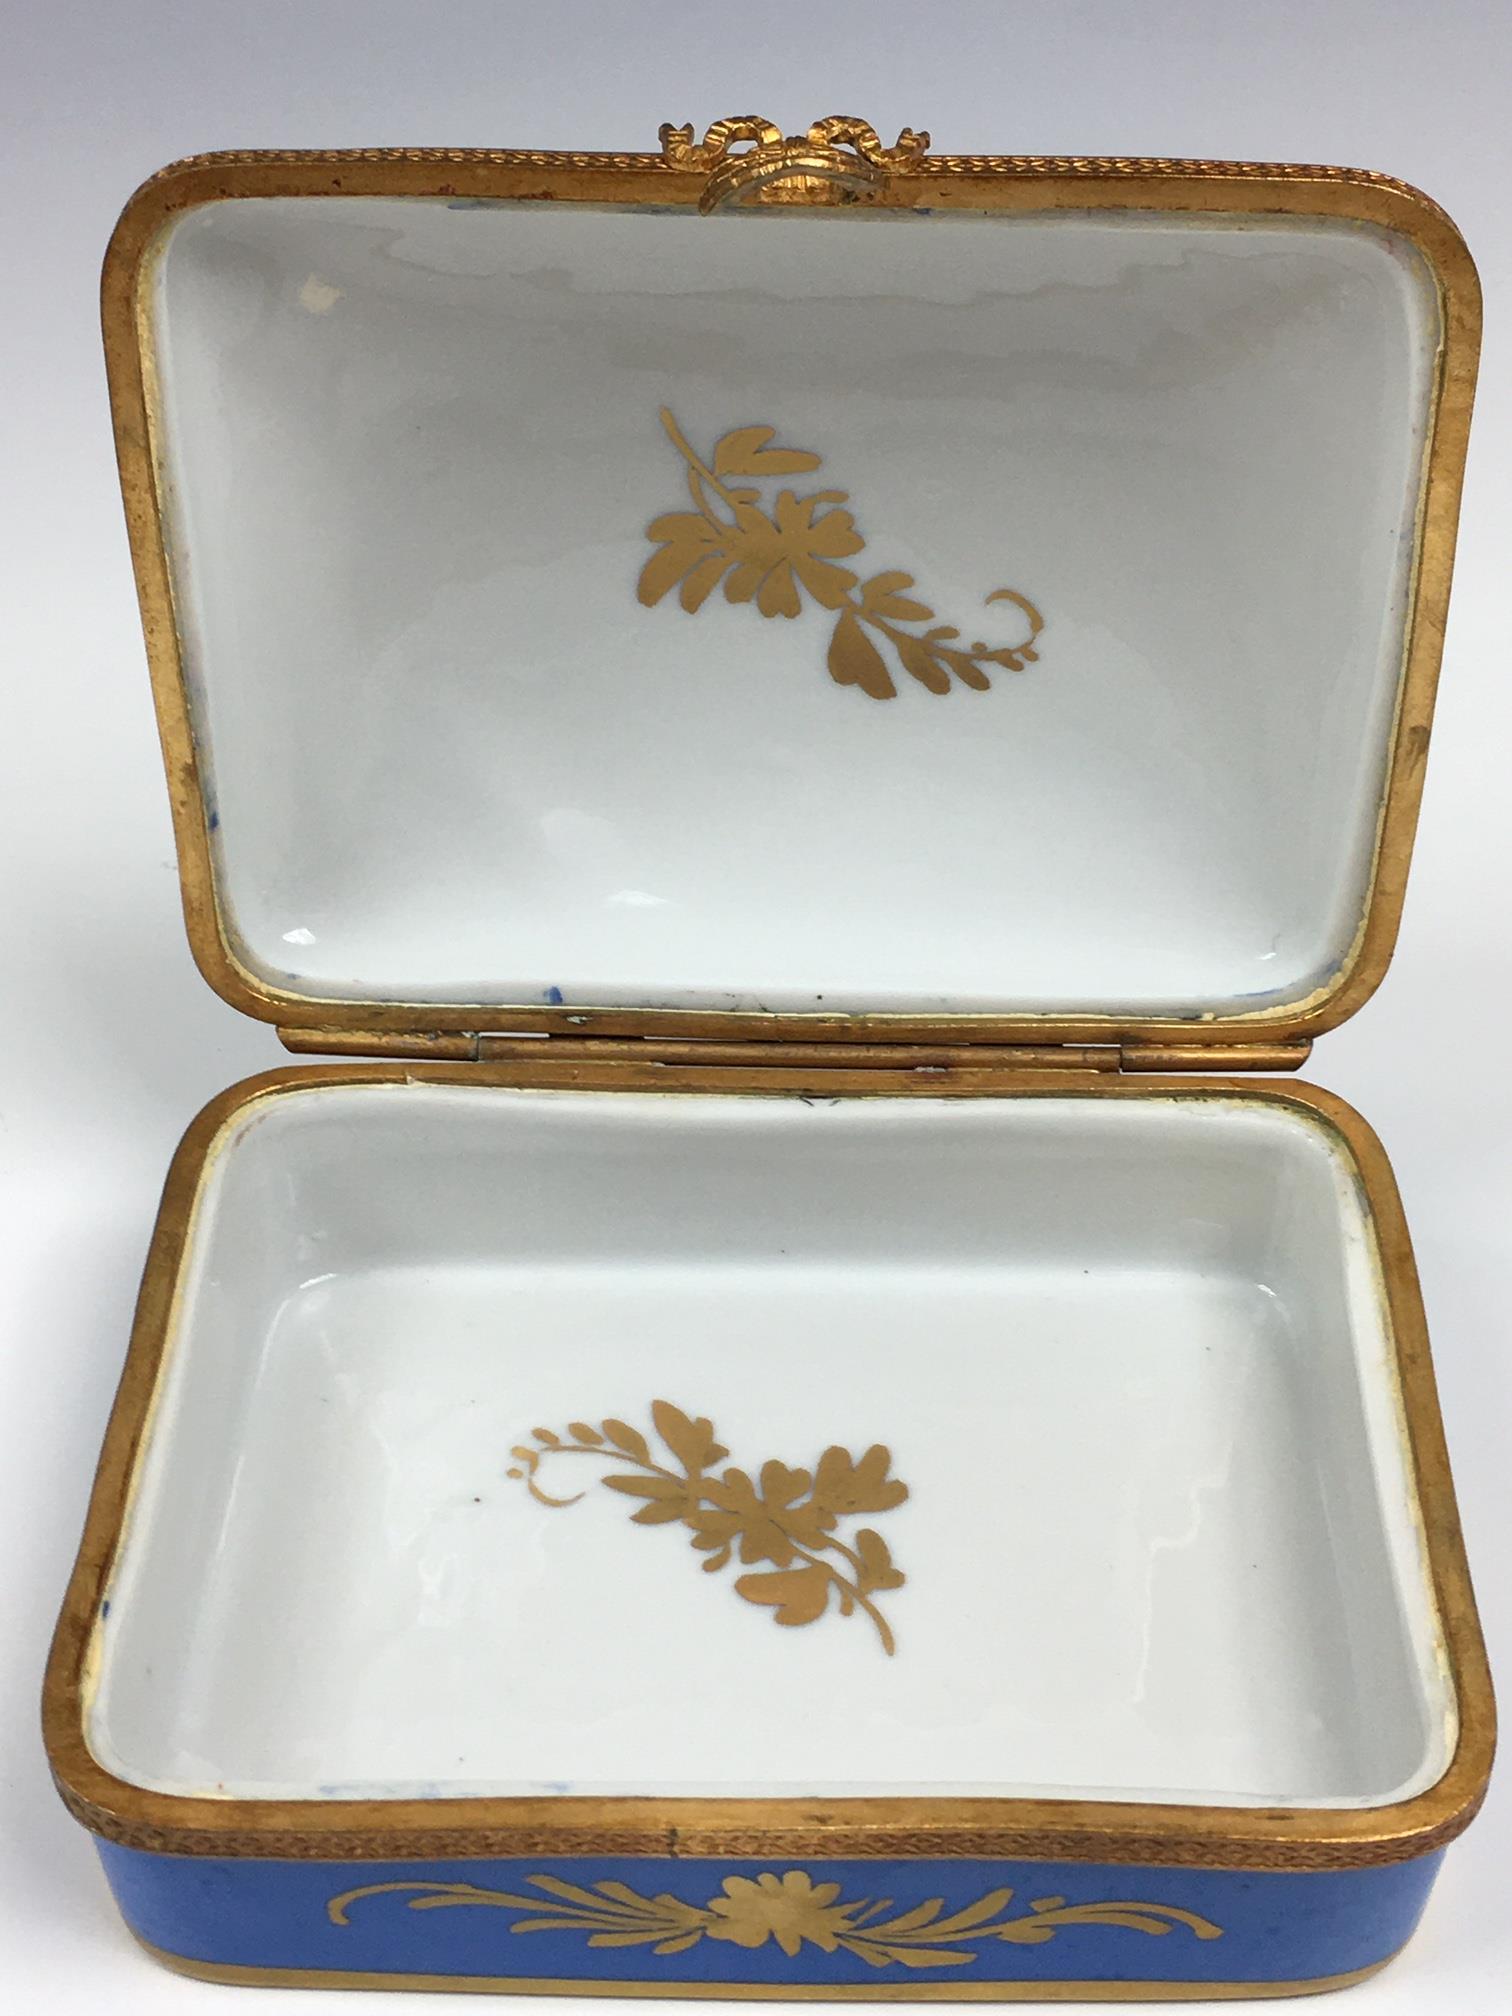 A French porcelain and gilt metal box, 20th century, painted with a floral reserve with gilt - Image 19 of 22